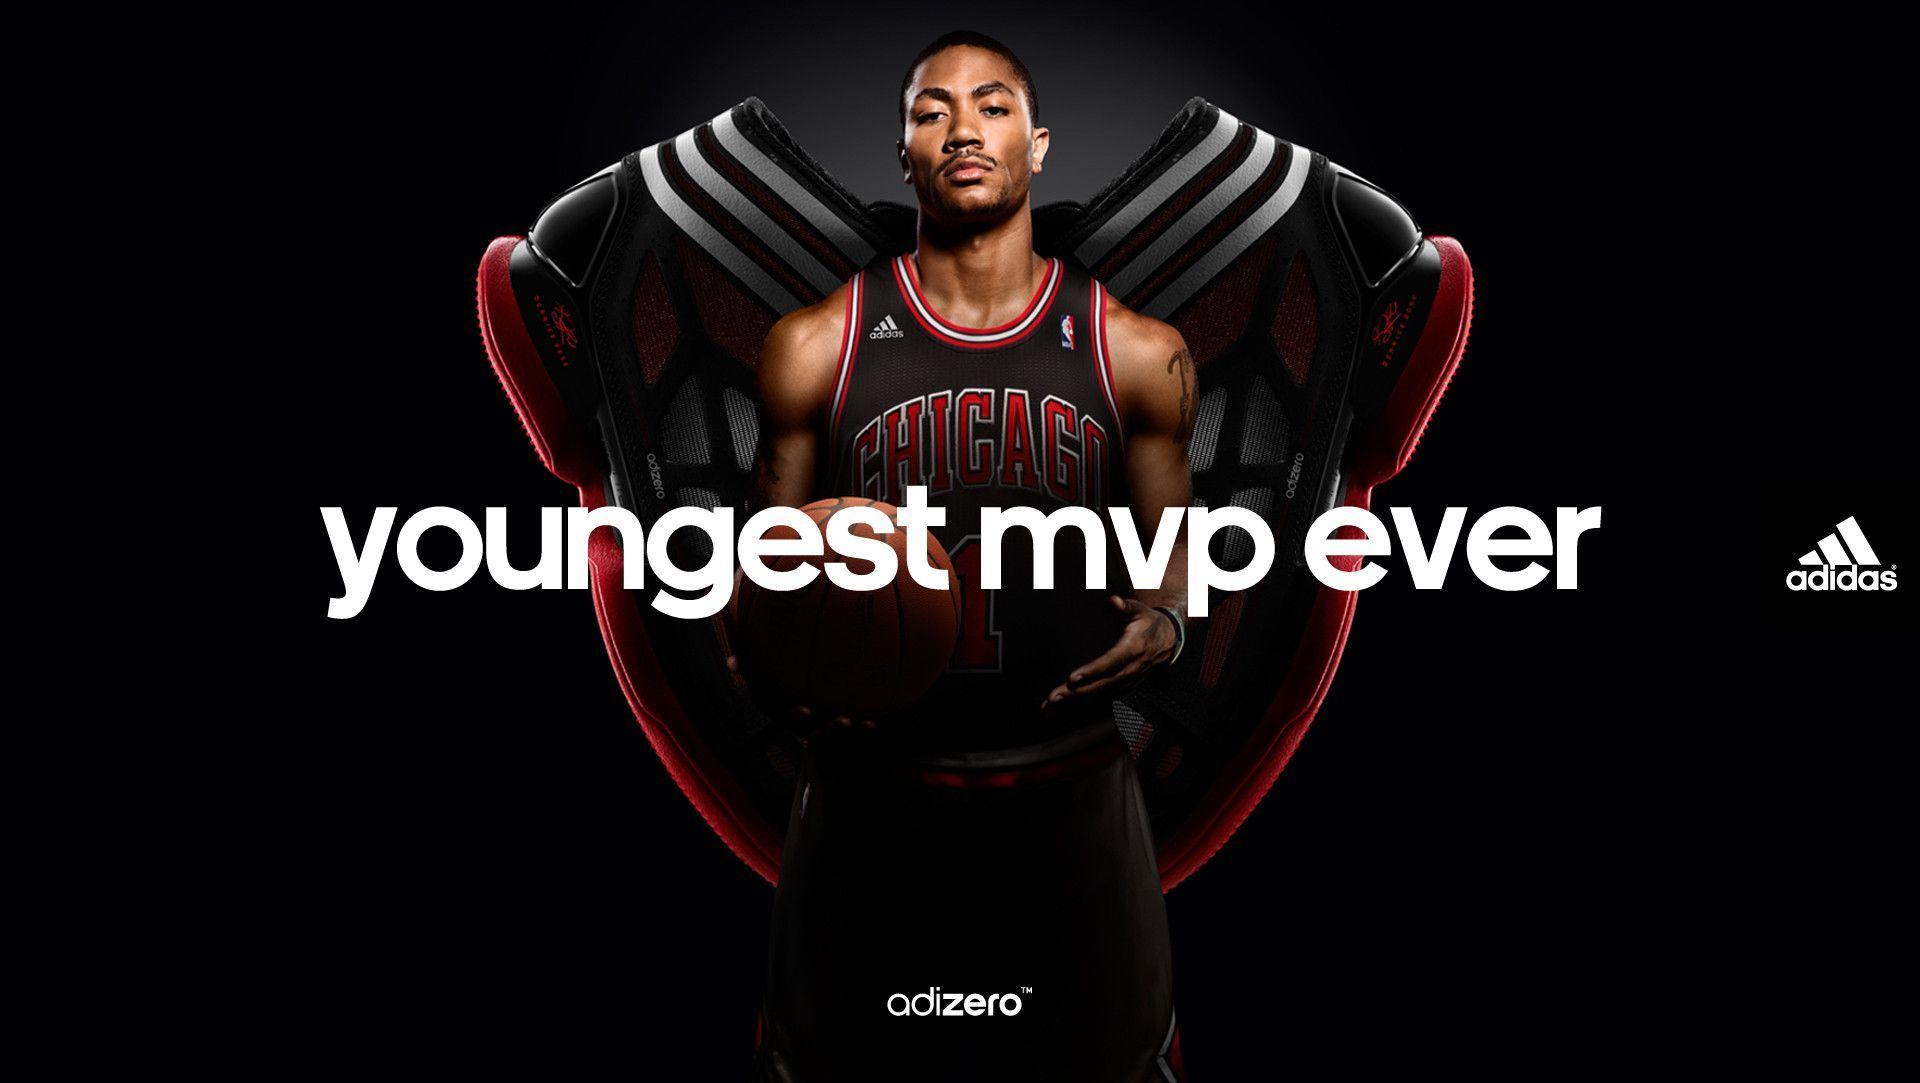 Derrick Rose, Youngest Mvp Ever